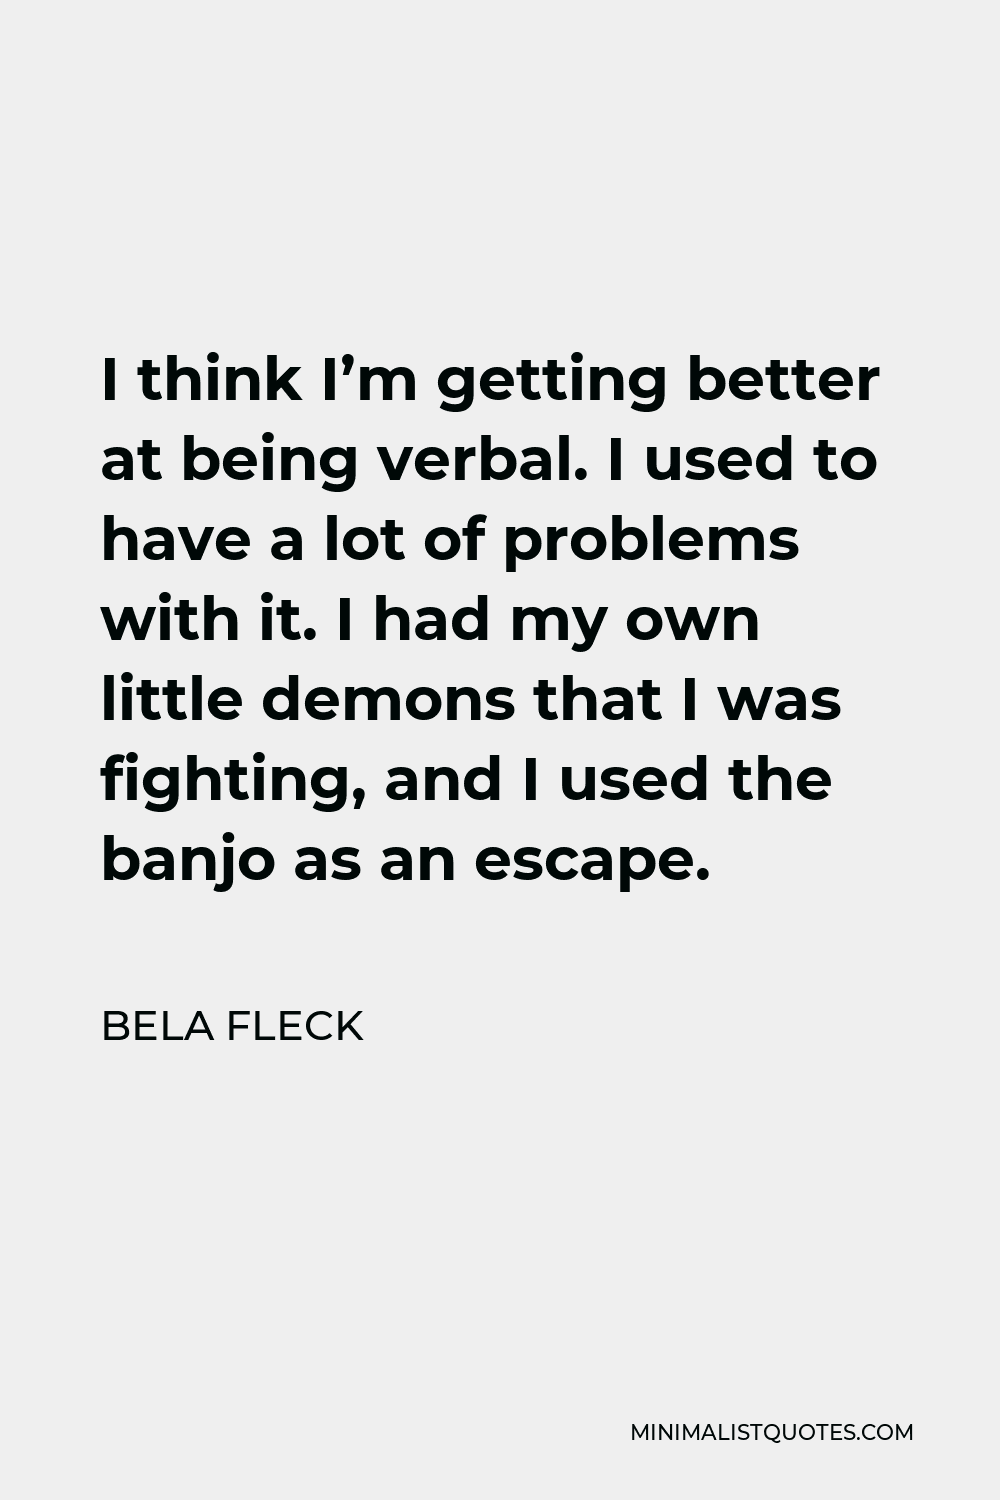 Bela Fleck Quote - I think I’m getting better at being verbal. I used to have a lot of problems with it. I had my own little demons that I was fighting, and I used the banjo as an escape.